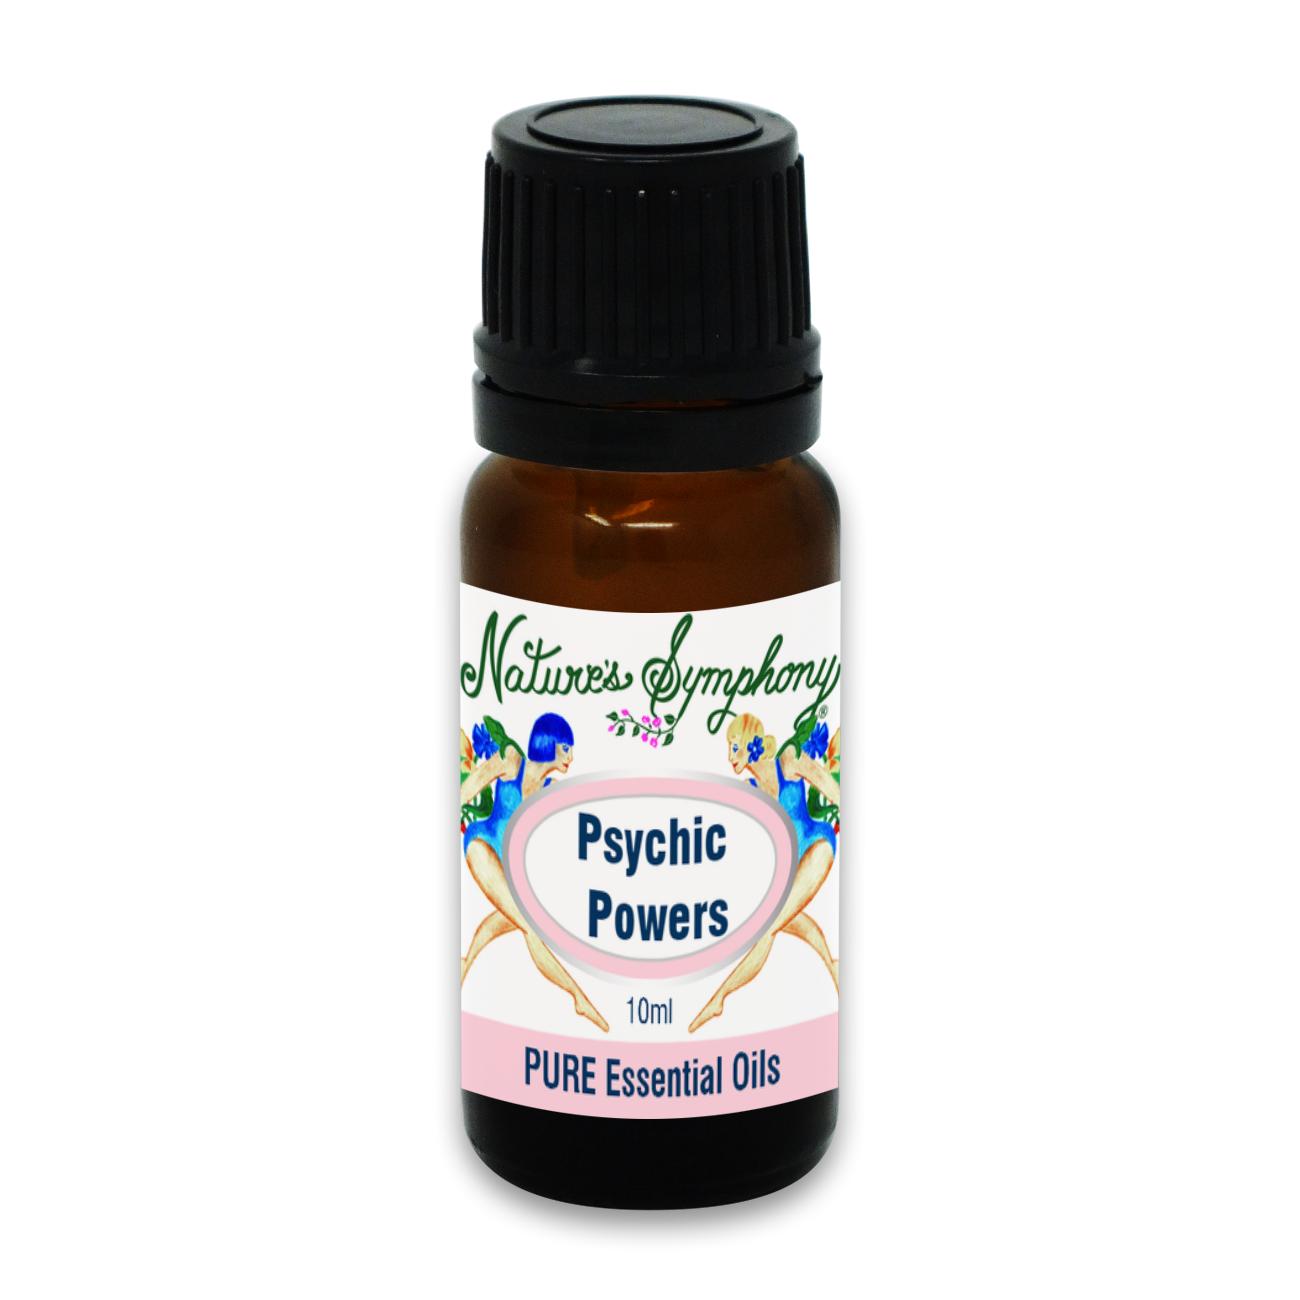 Psychic Powers, Ambiance Diffusion blend - 10ml